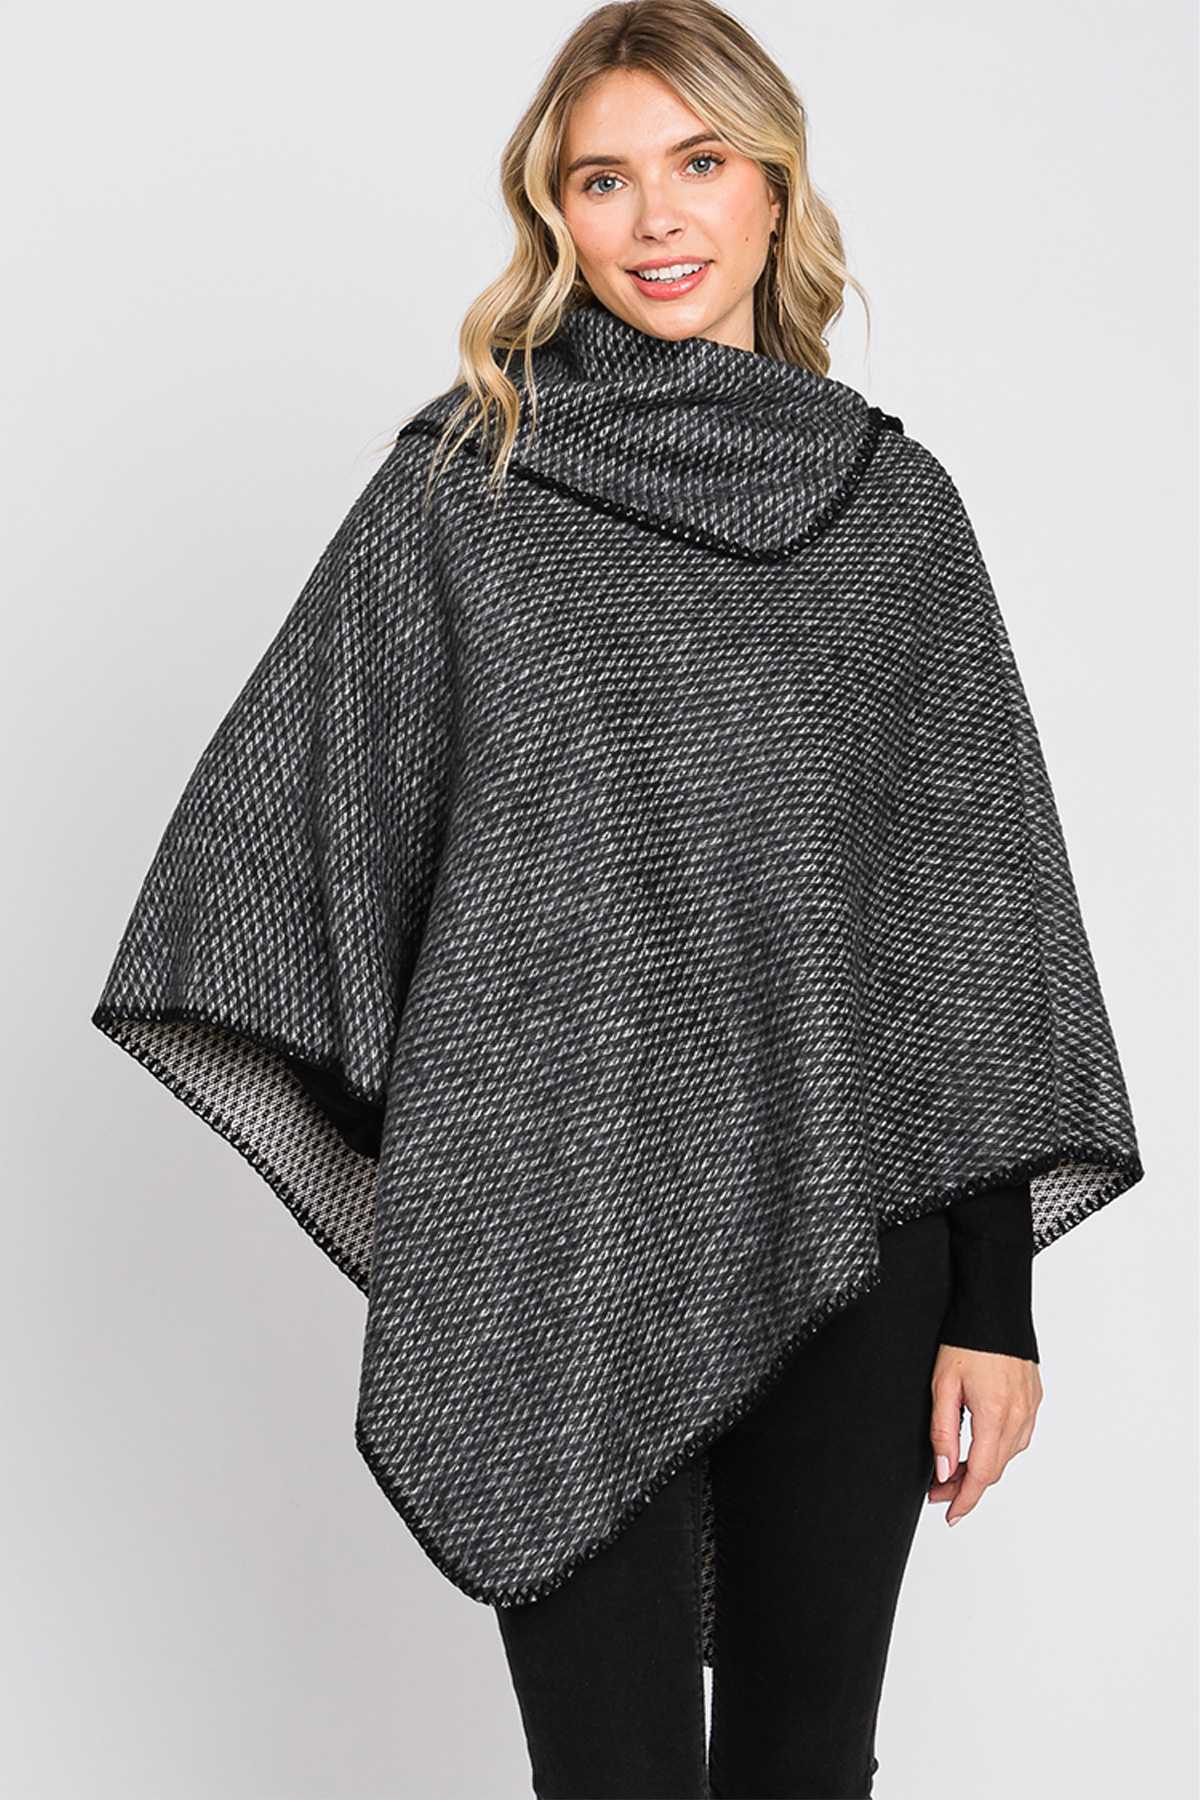 Solid Textured Neck Poncho